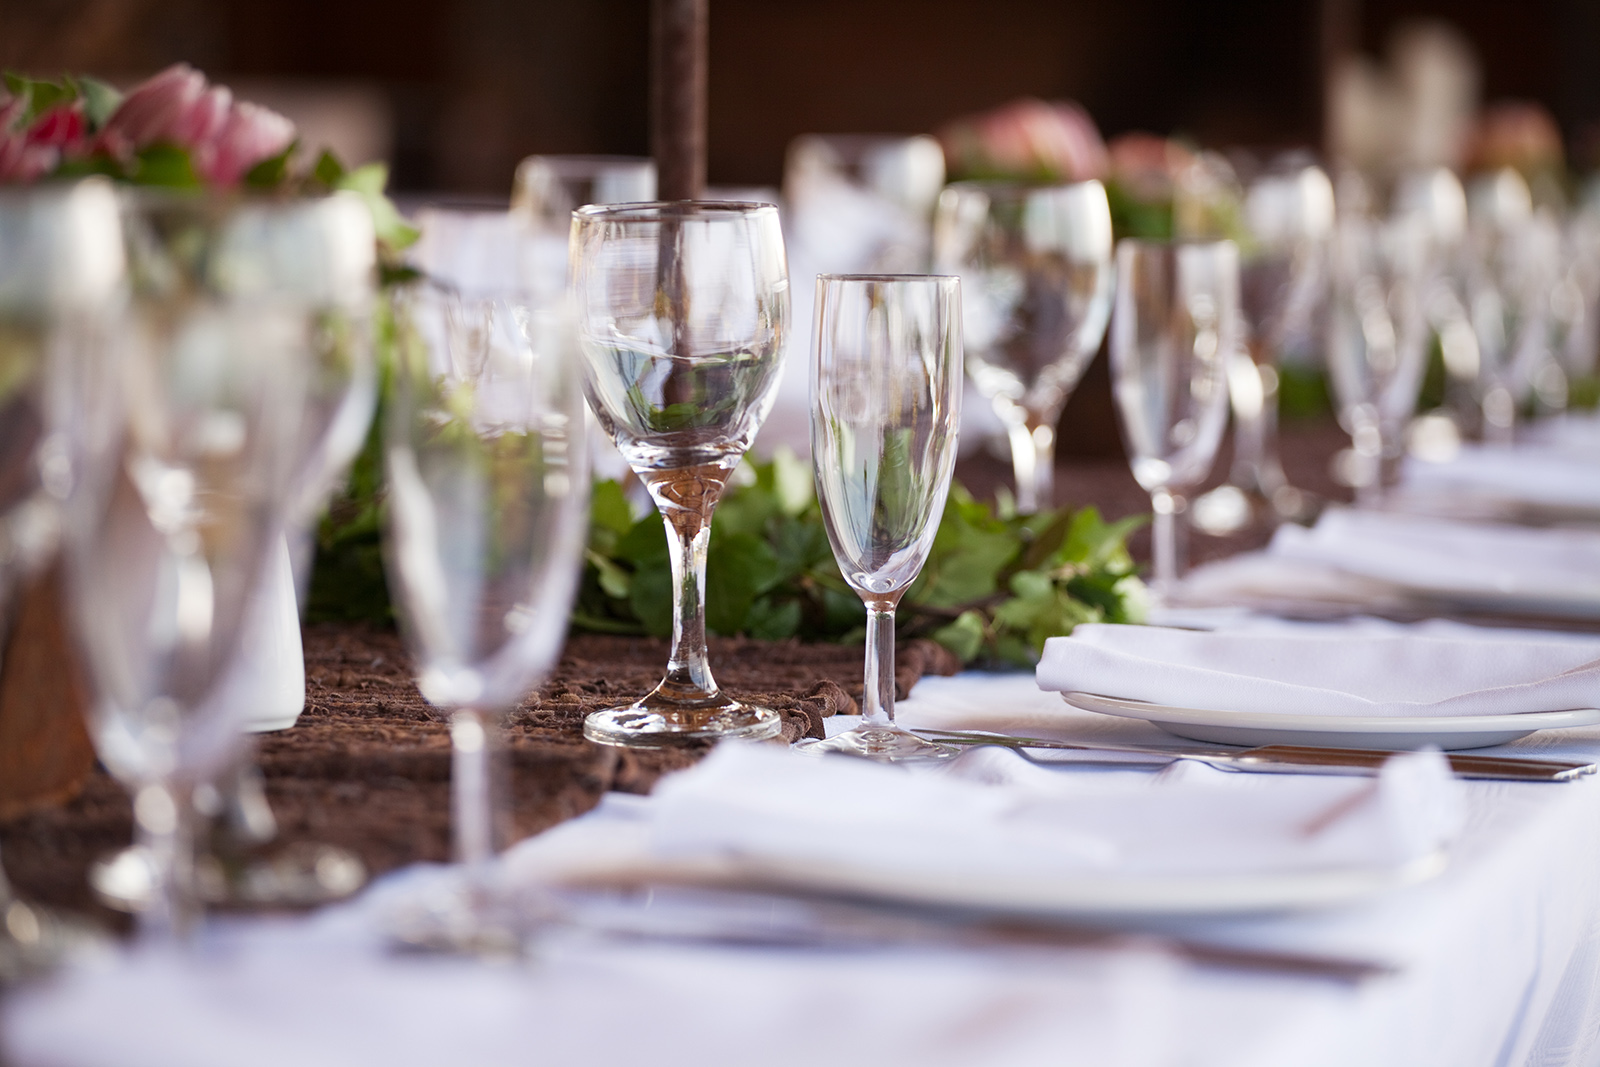 Silver Service Protocols: There's more to master than just table décor